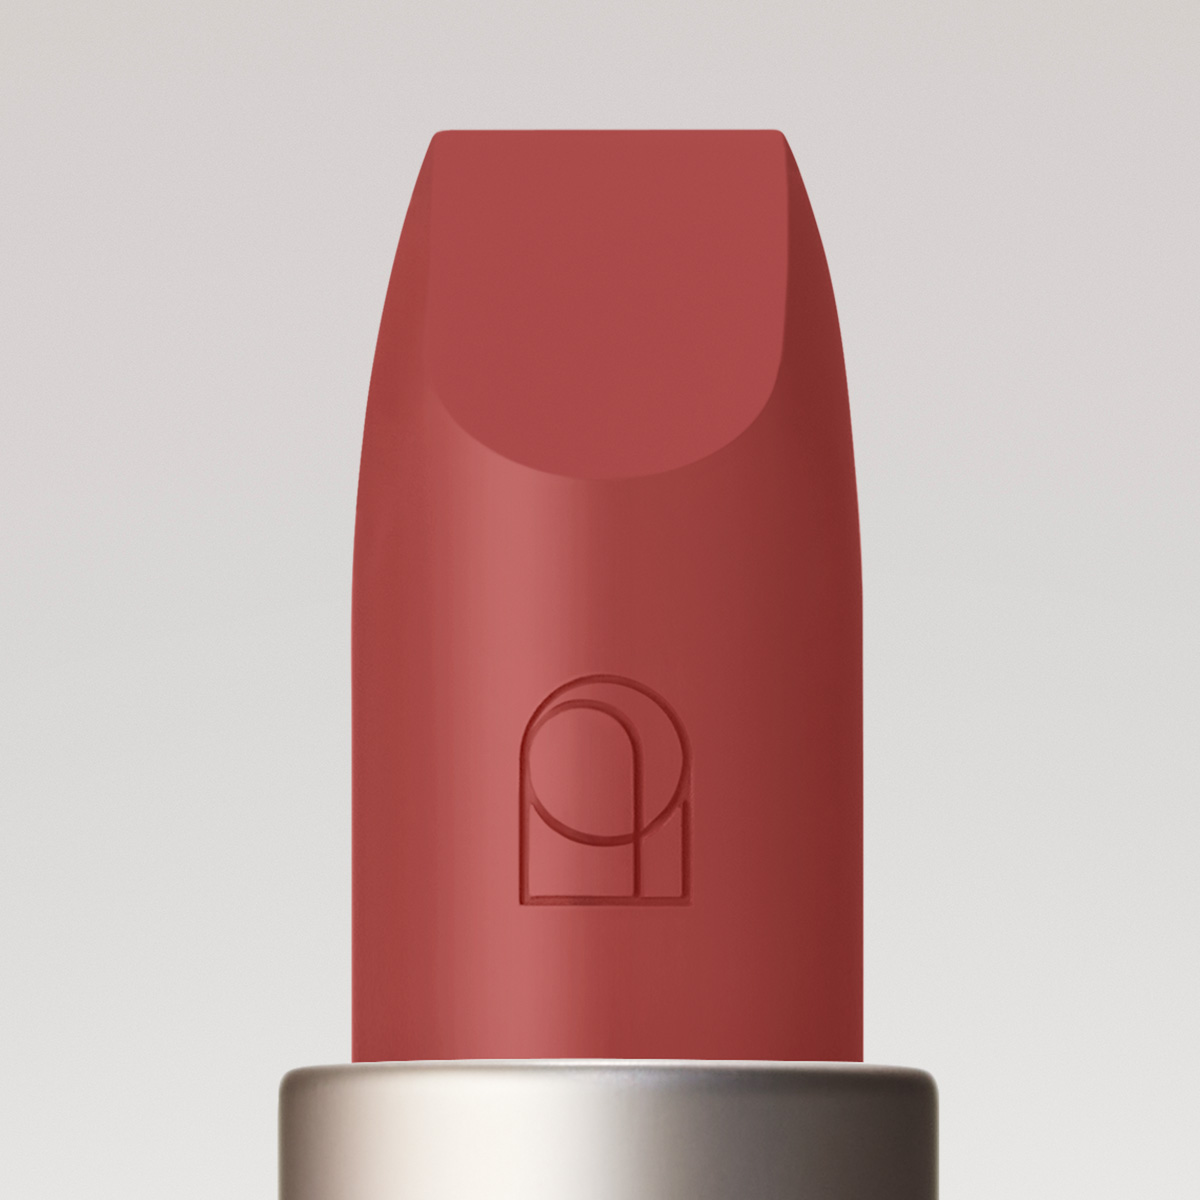 Close up image of the Satin Lipstick bullet with Rose Inc logo detail